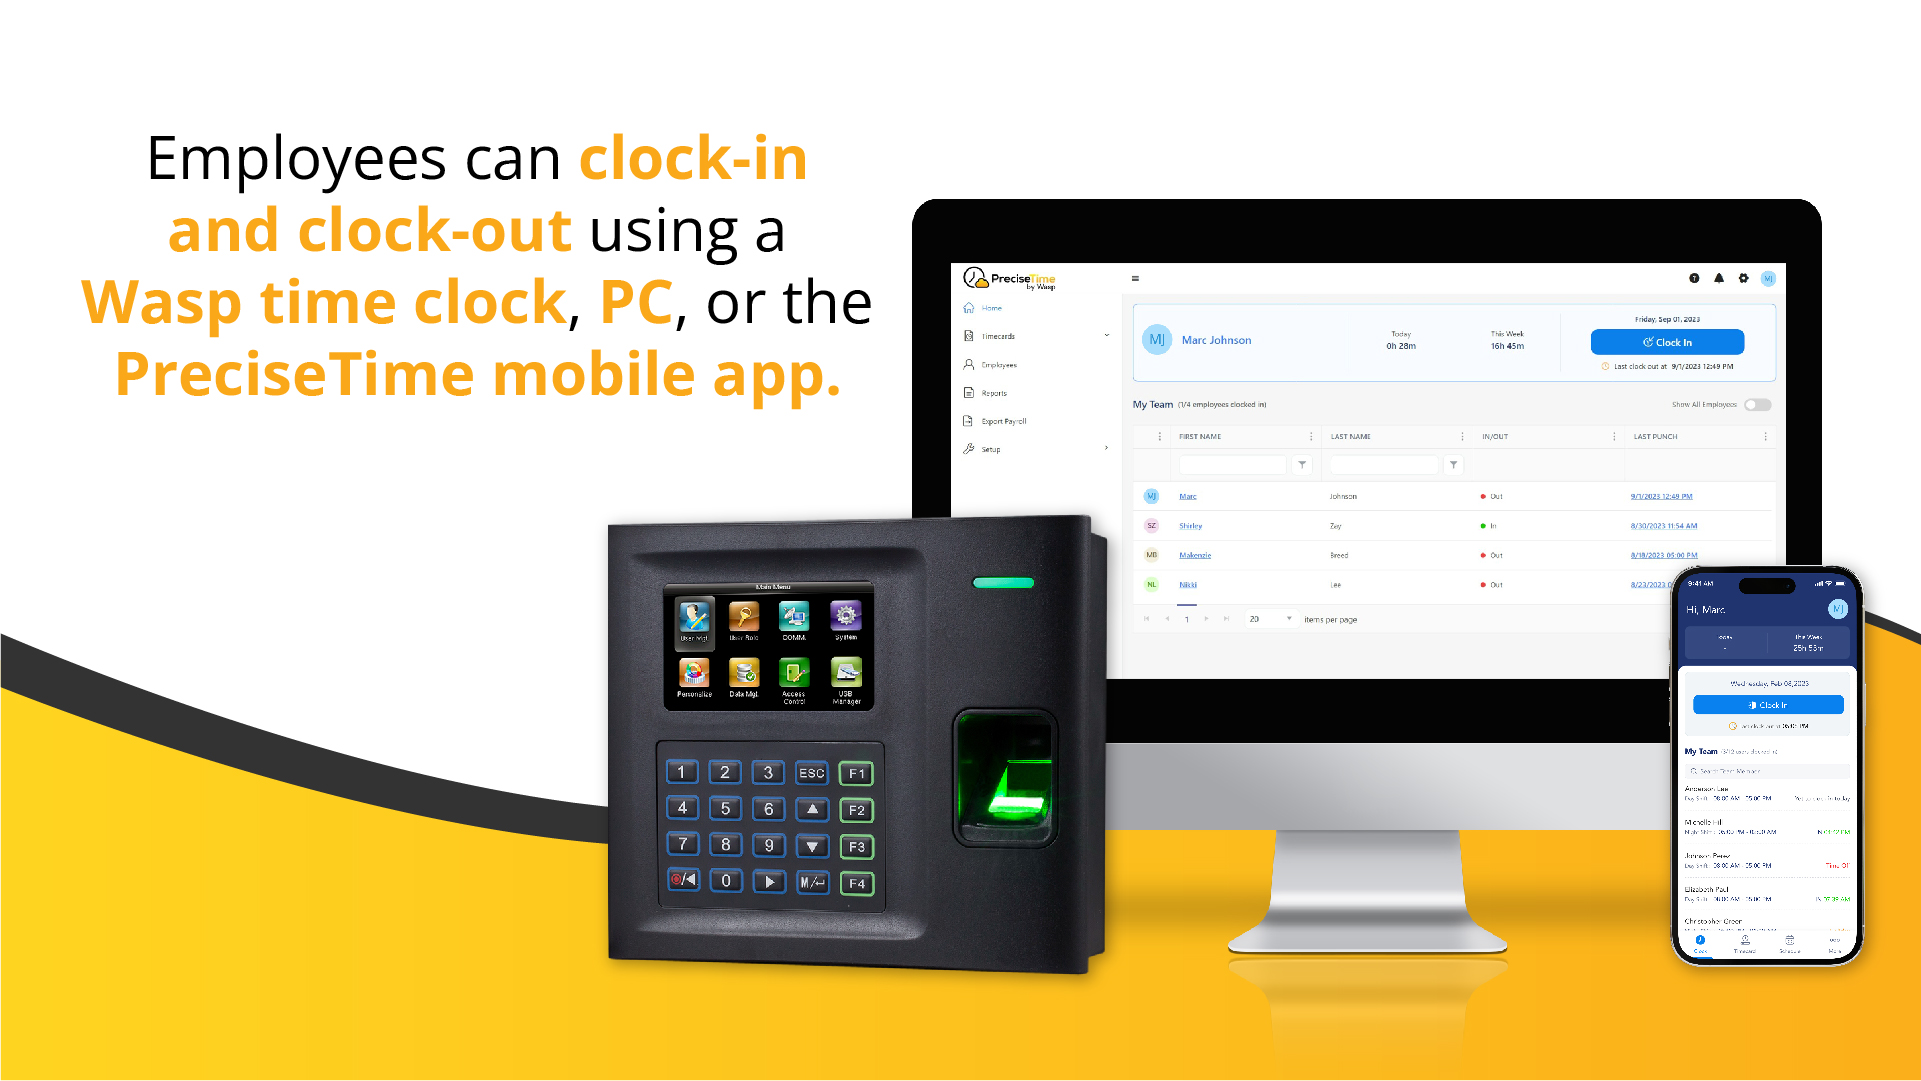 Employee can clock-in and clock-out using a Wasp time clock, PC, or the PreciseTime mobile app